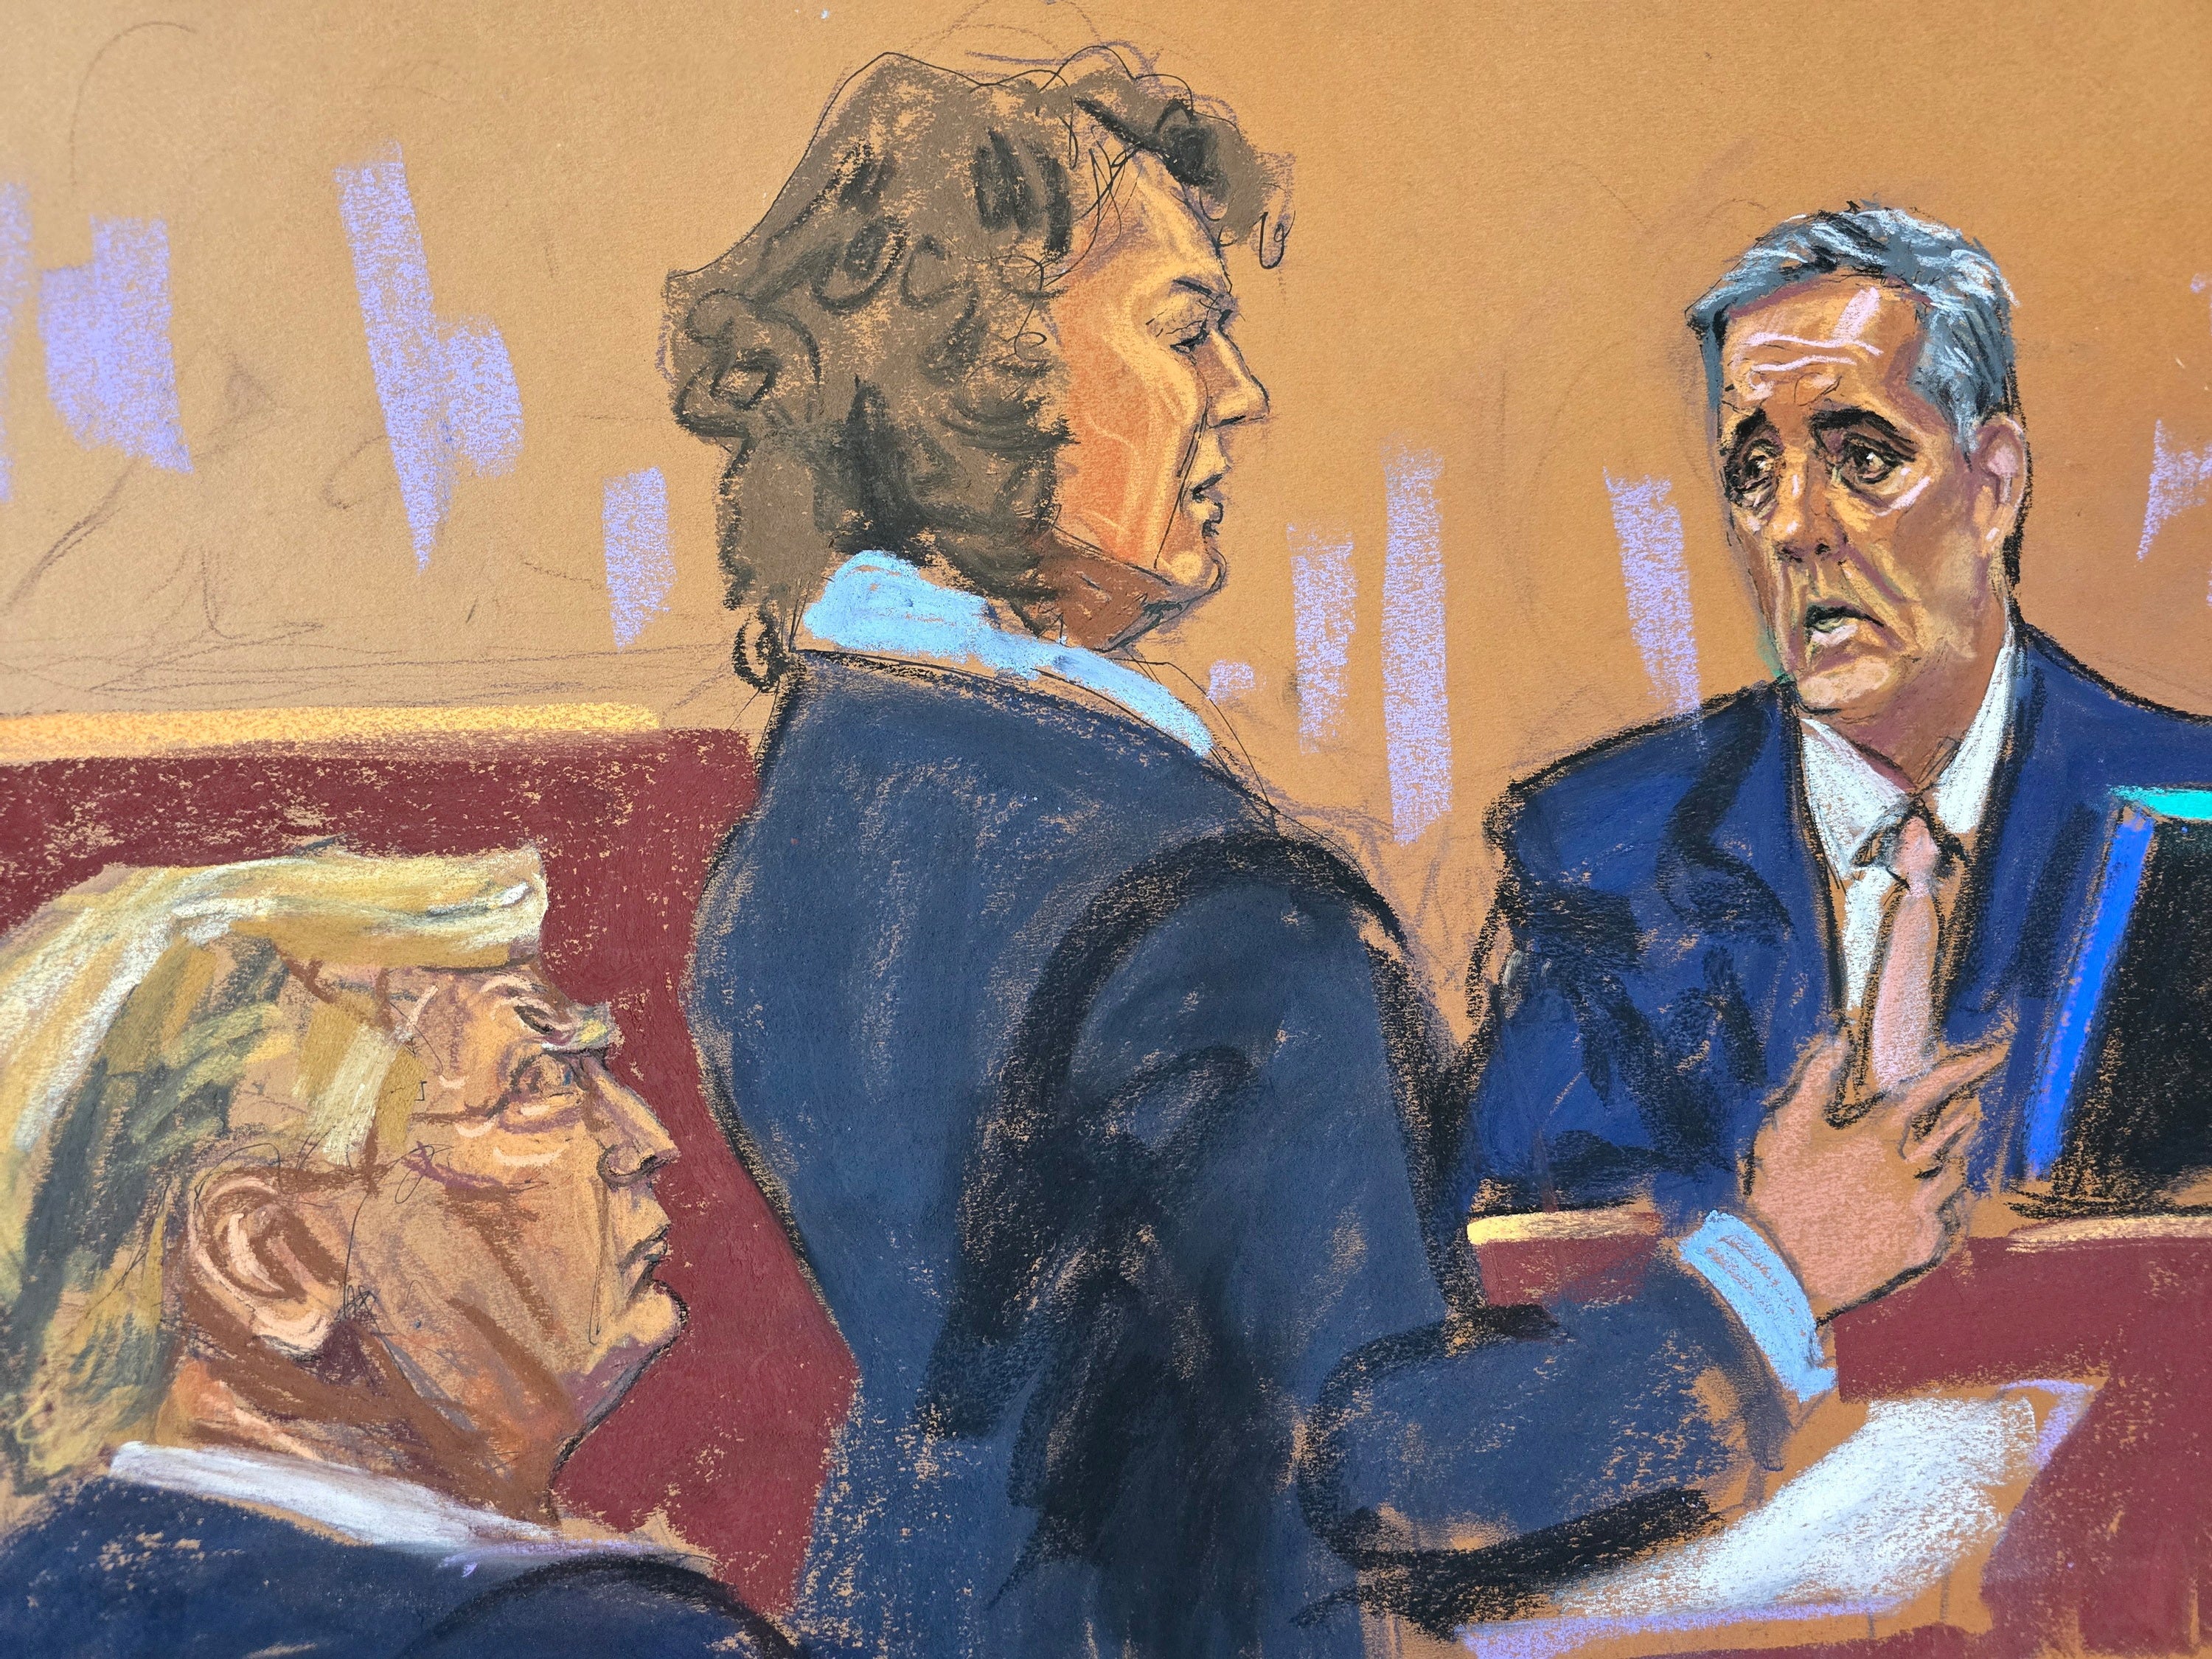 A courtroom sketch depicts Assistant District Attorney Susan Hoffinger questions Michael Cohen as Donald Trump watches at his hush money trial in Manhattan on 13 May.